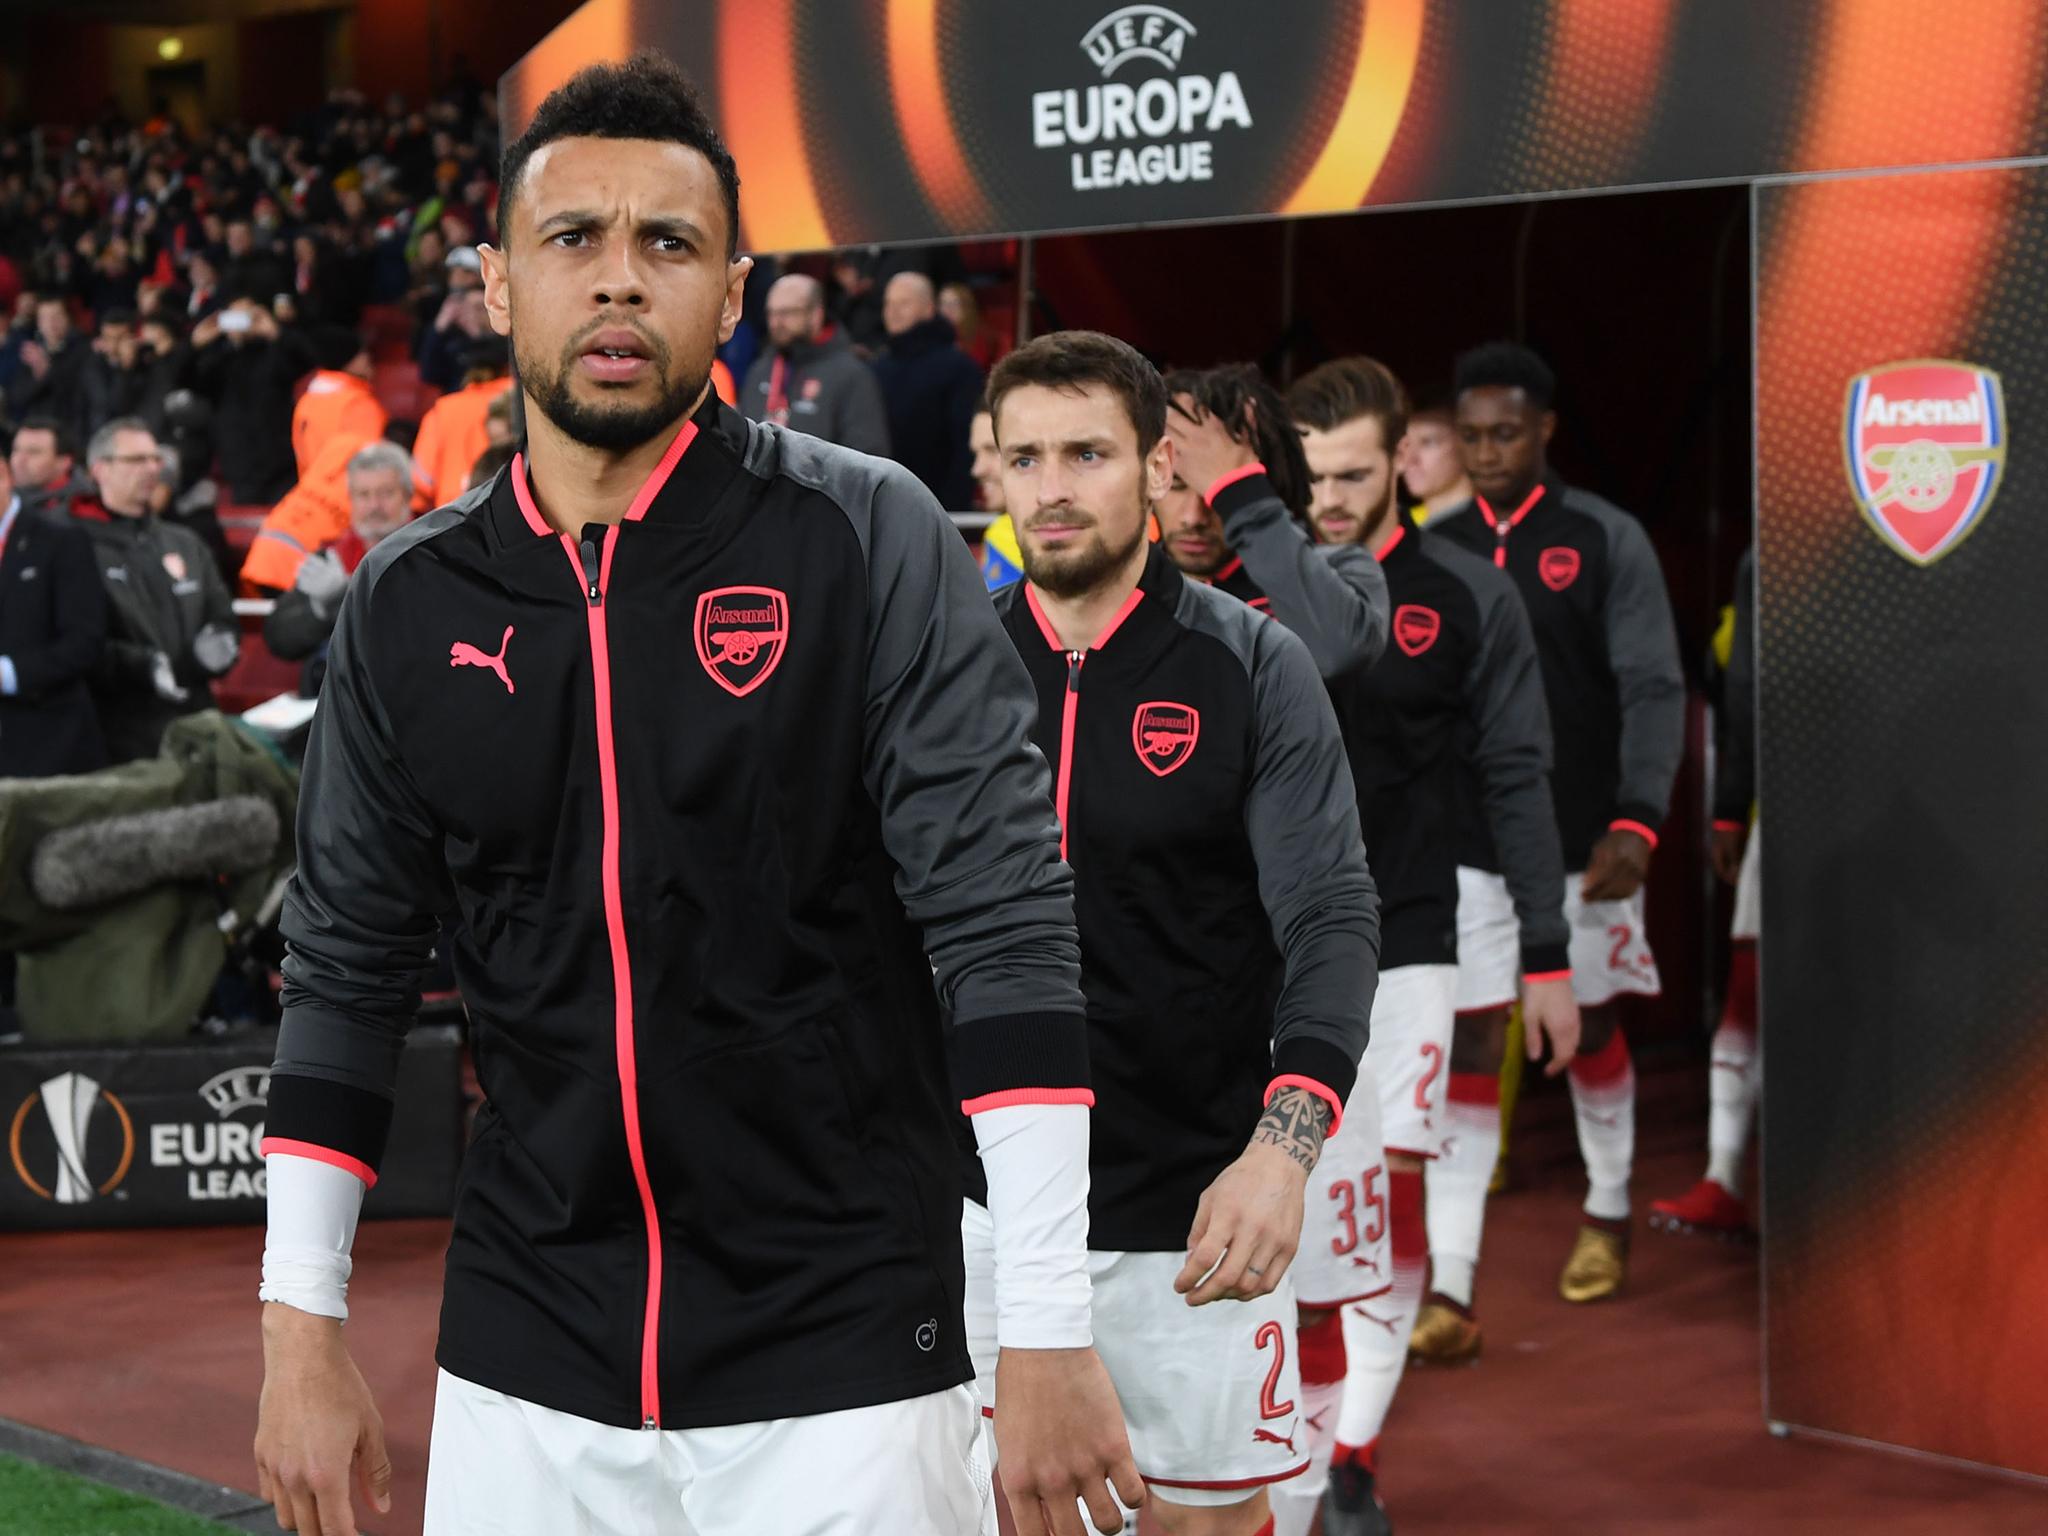 Francis Coquelin has joined Valencia on a four-and-a-half year deal